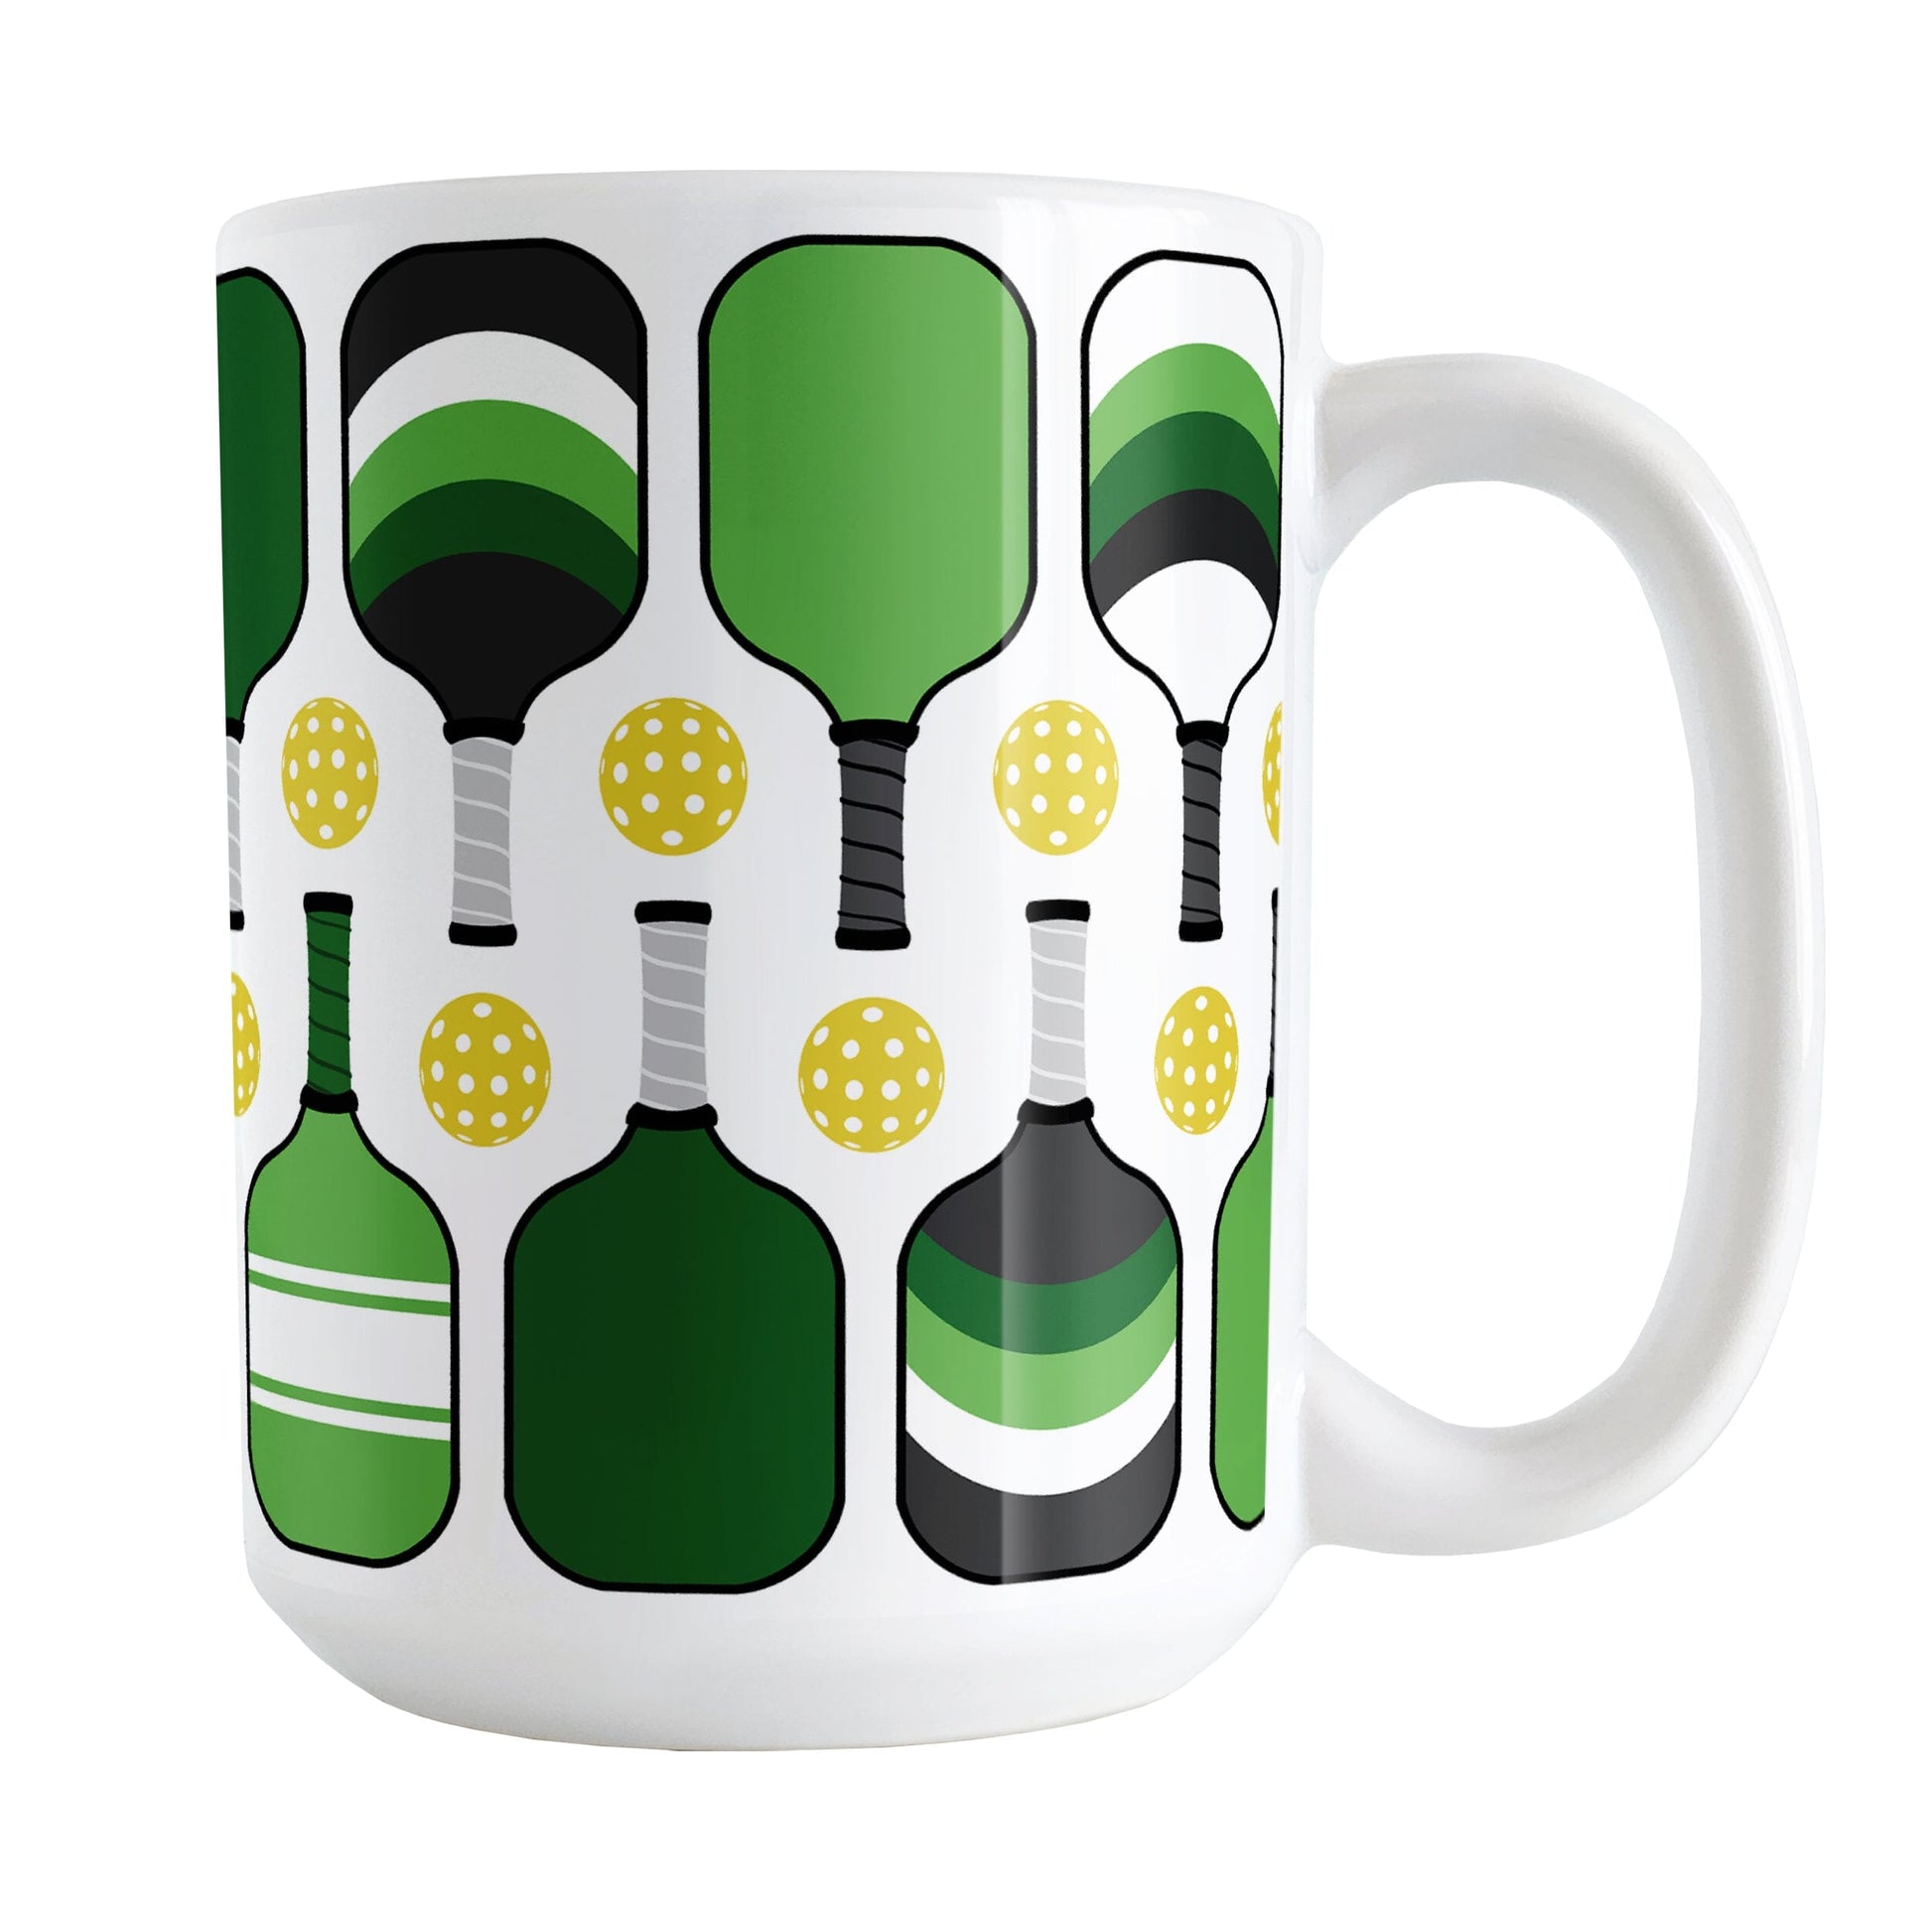 Green Pickleball Mug (15oz) at Amy's Coffee Mugs. A ceramic coffee mug designed with modern green pickleball paddles and yellow balls in a pattern that wraps around the mug up to the handle.